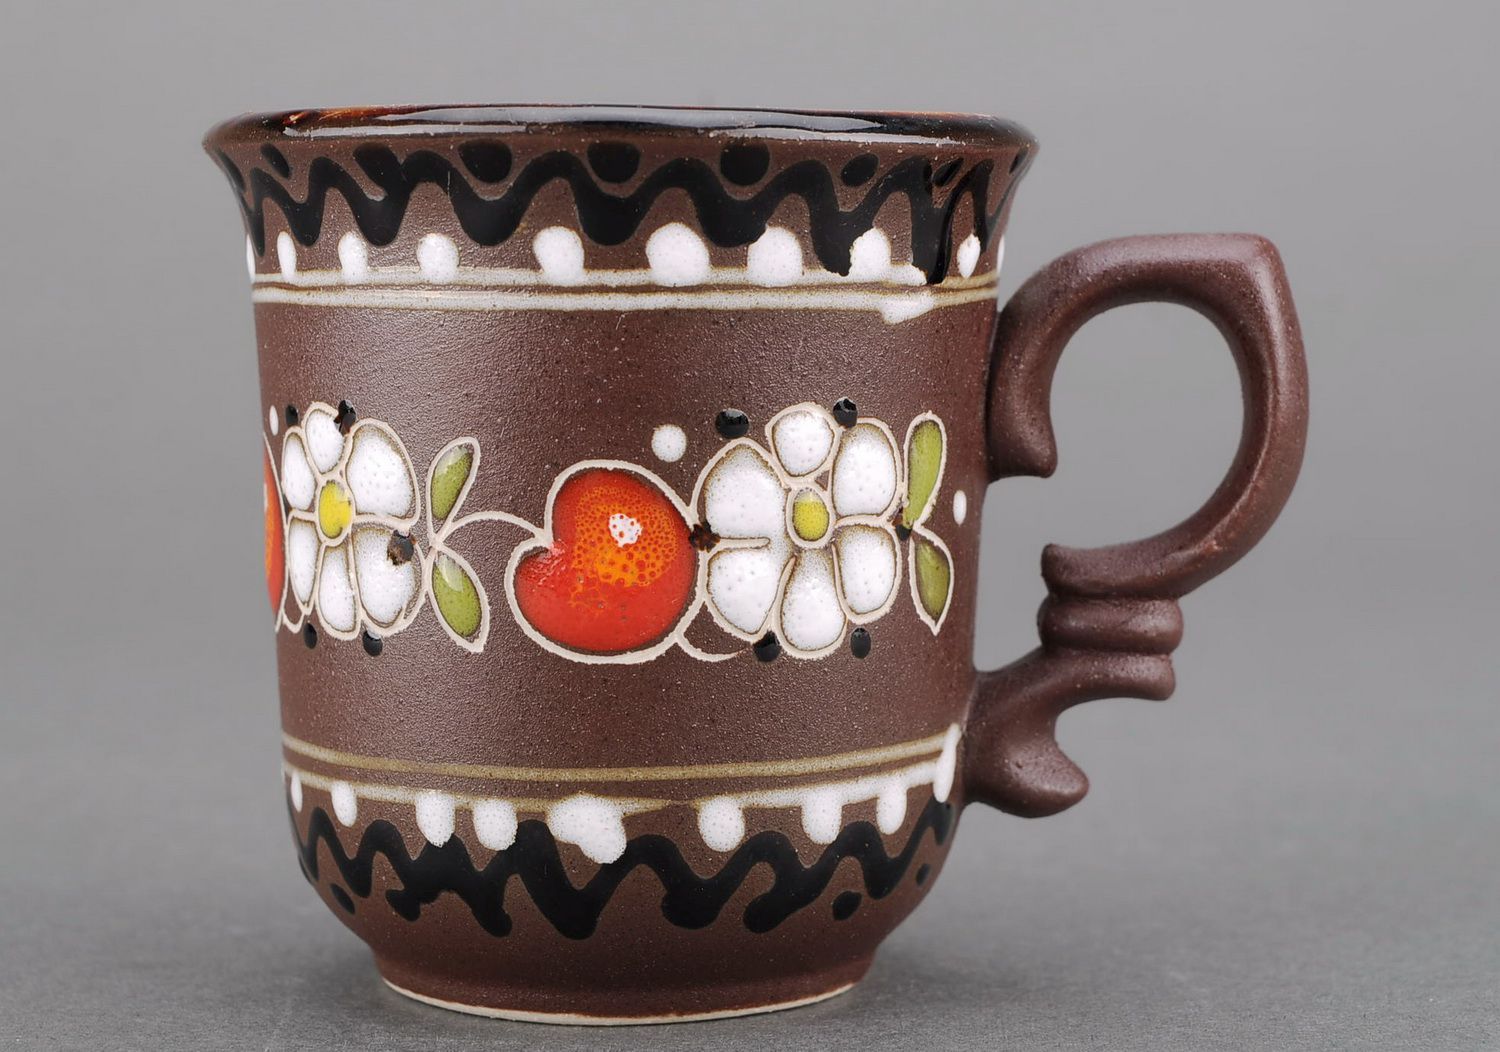 Clay lead-free glazed hand-painted teacup in brown, white, and red color with handle photo 2